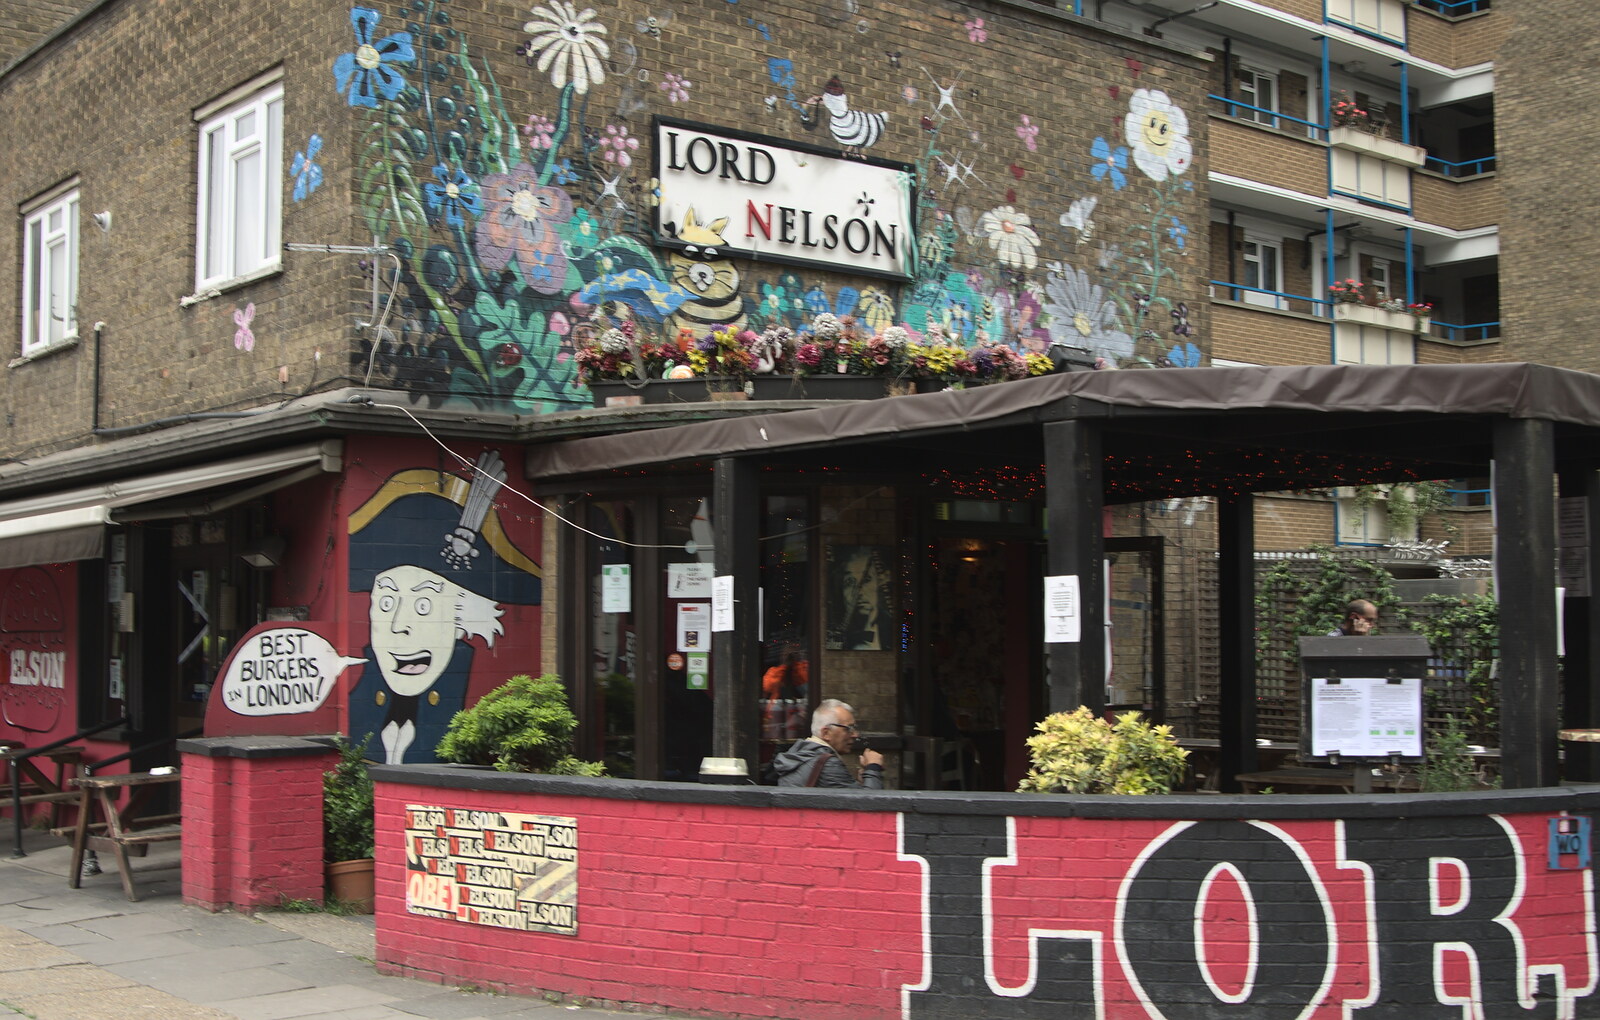 The Lord Nelson pub from Fred's Cast and a SwiftKey Lunch, Waterloo, London - 18th August 2015